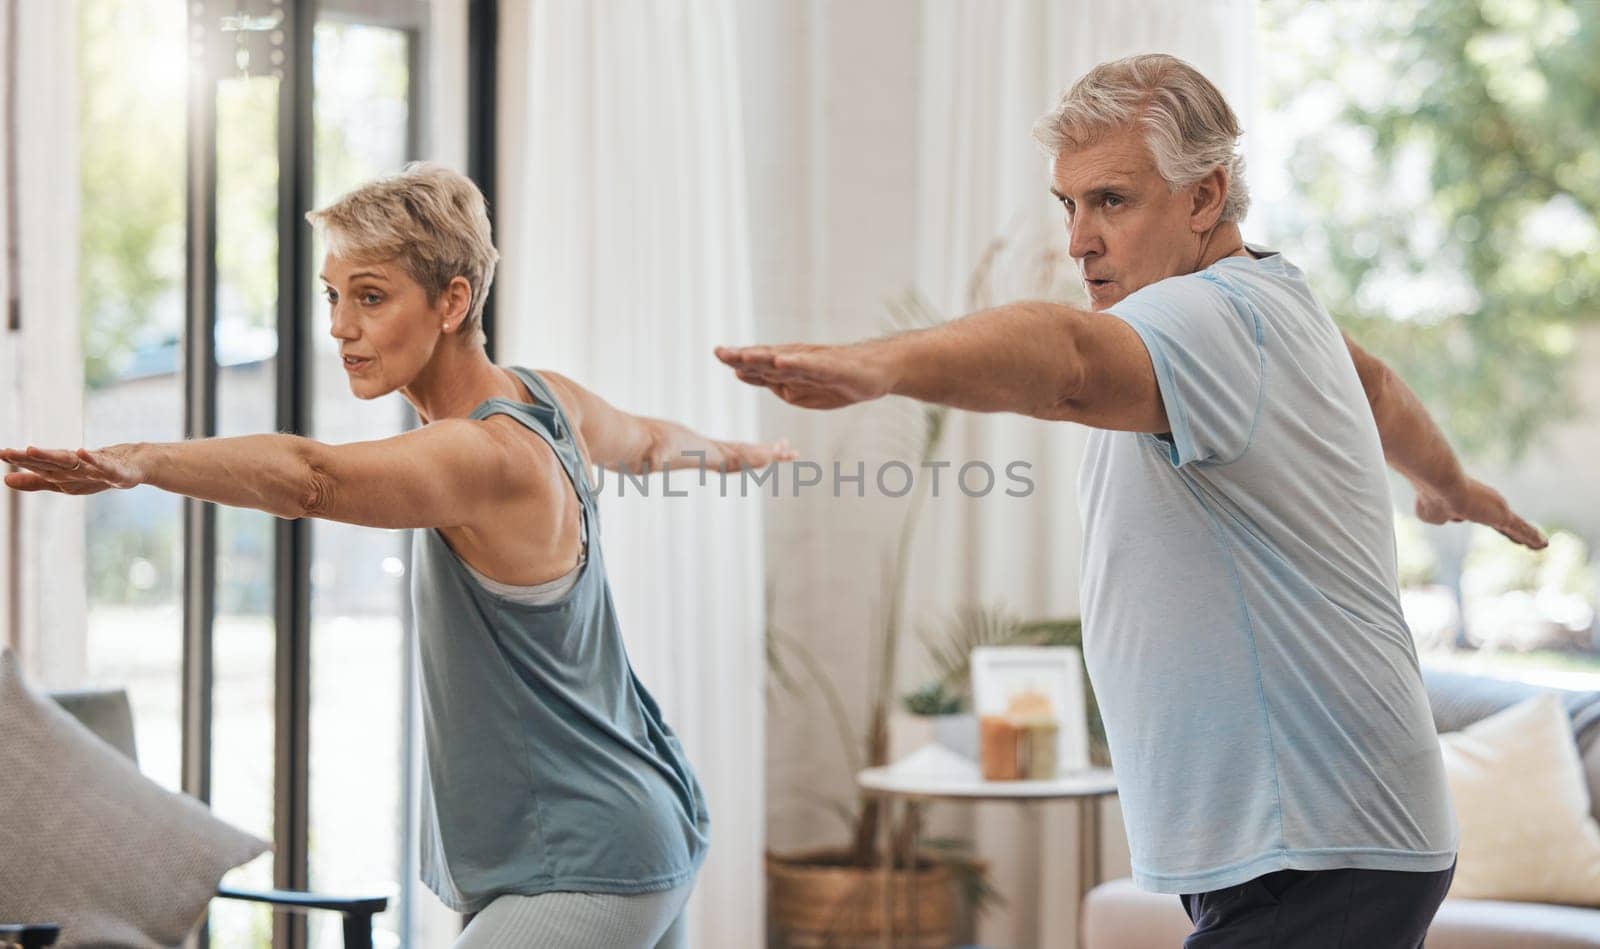 Senior couple, exercise and fitness during aerobics or yoga workout in the lounge at home for health and wellness in retirement. Old man and woman stretching for healthy lifestyle in Australia house.